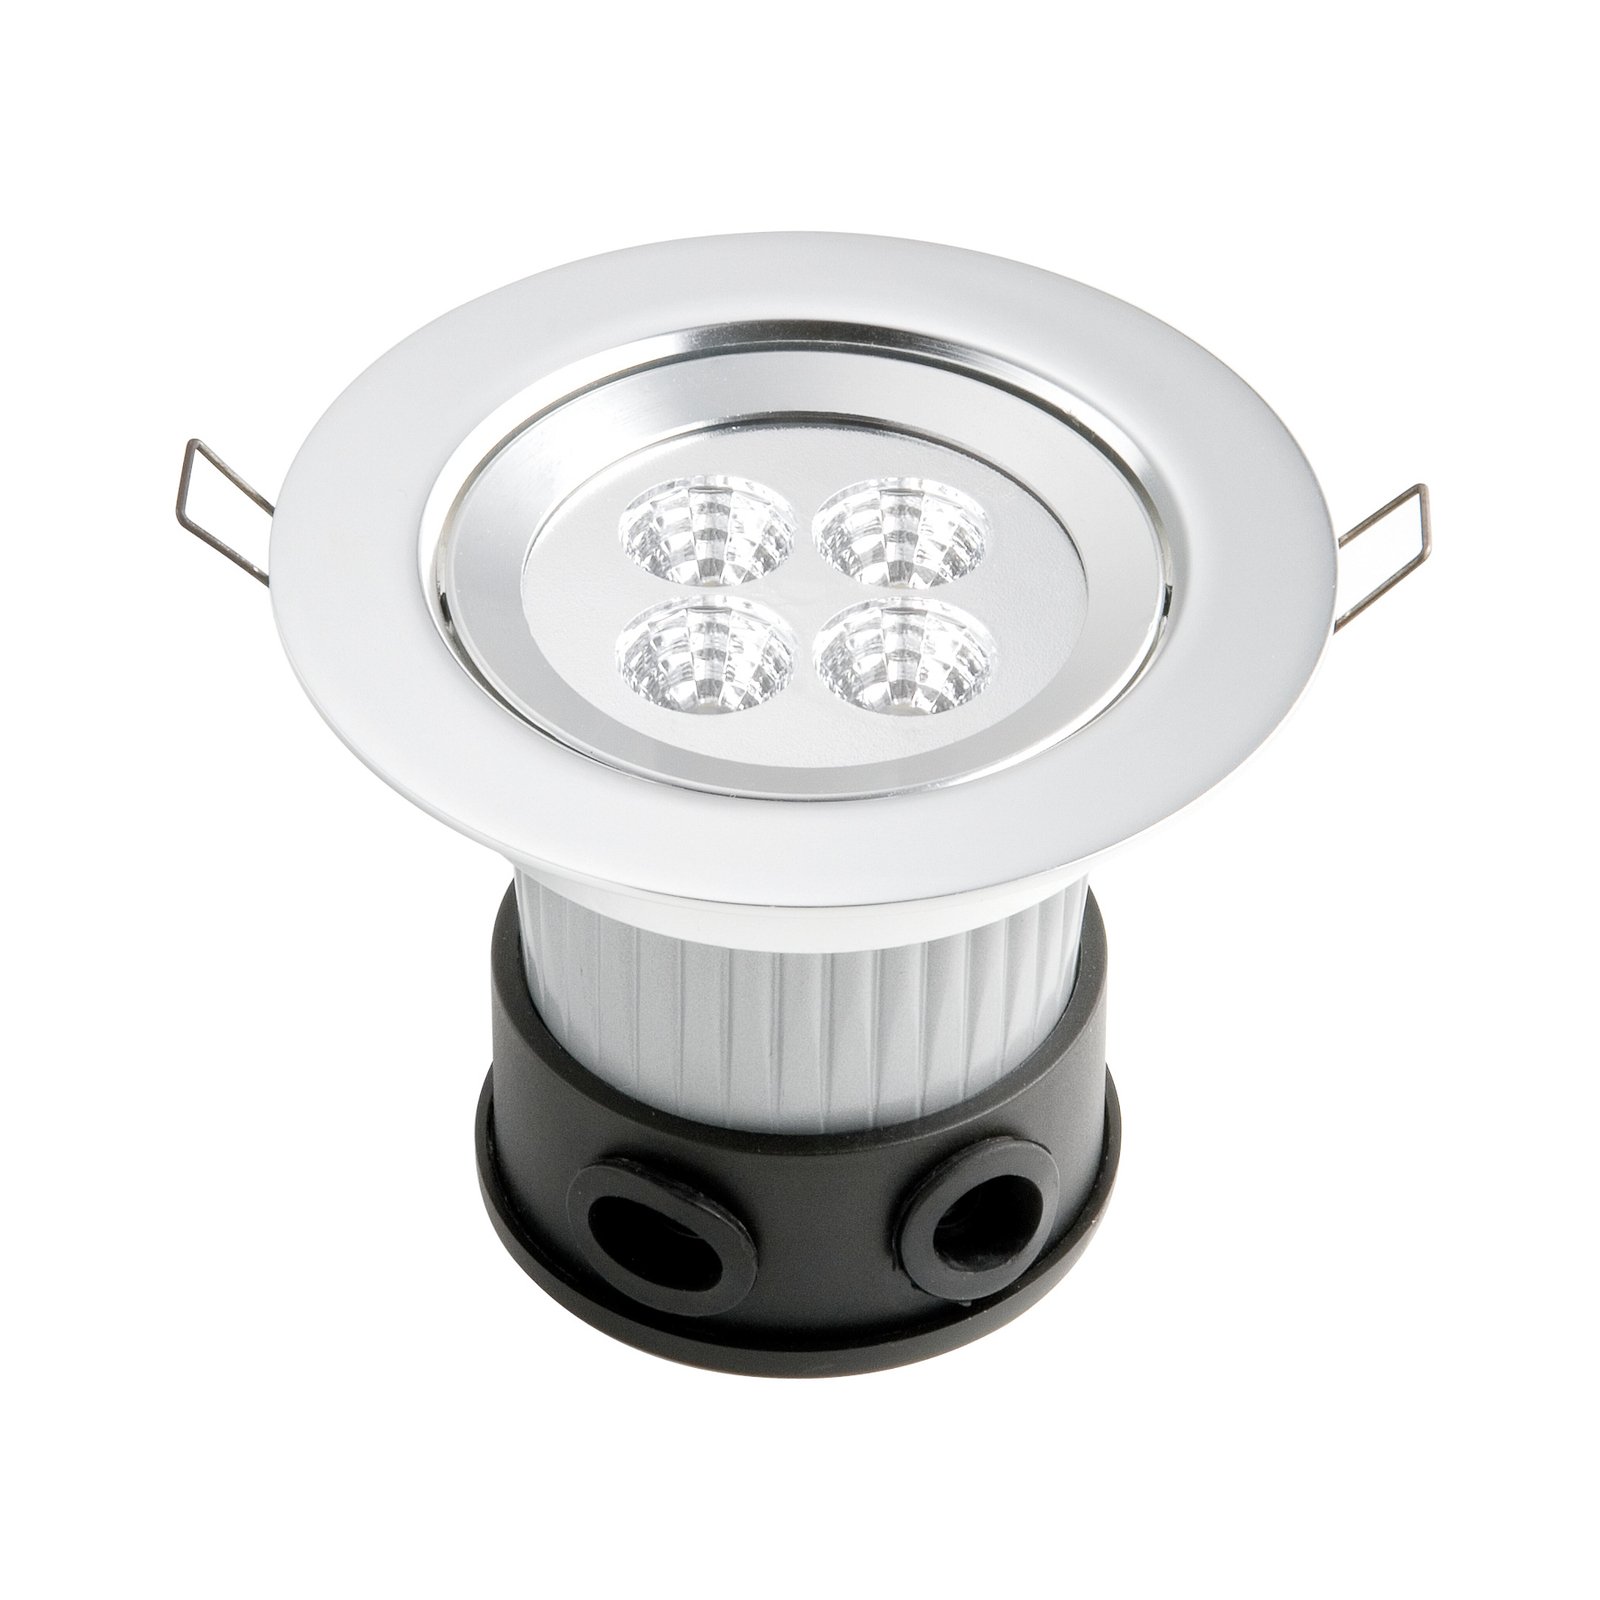 Recessed ceiling light with power LEDs